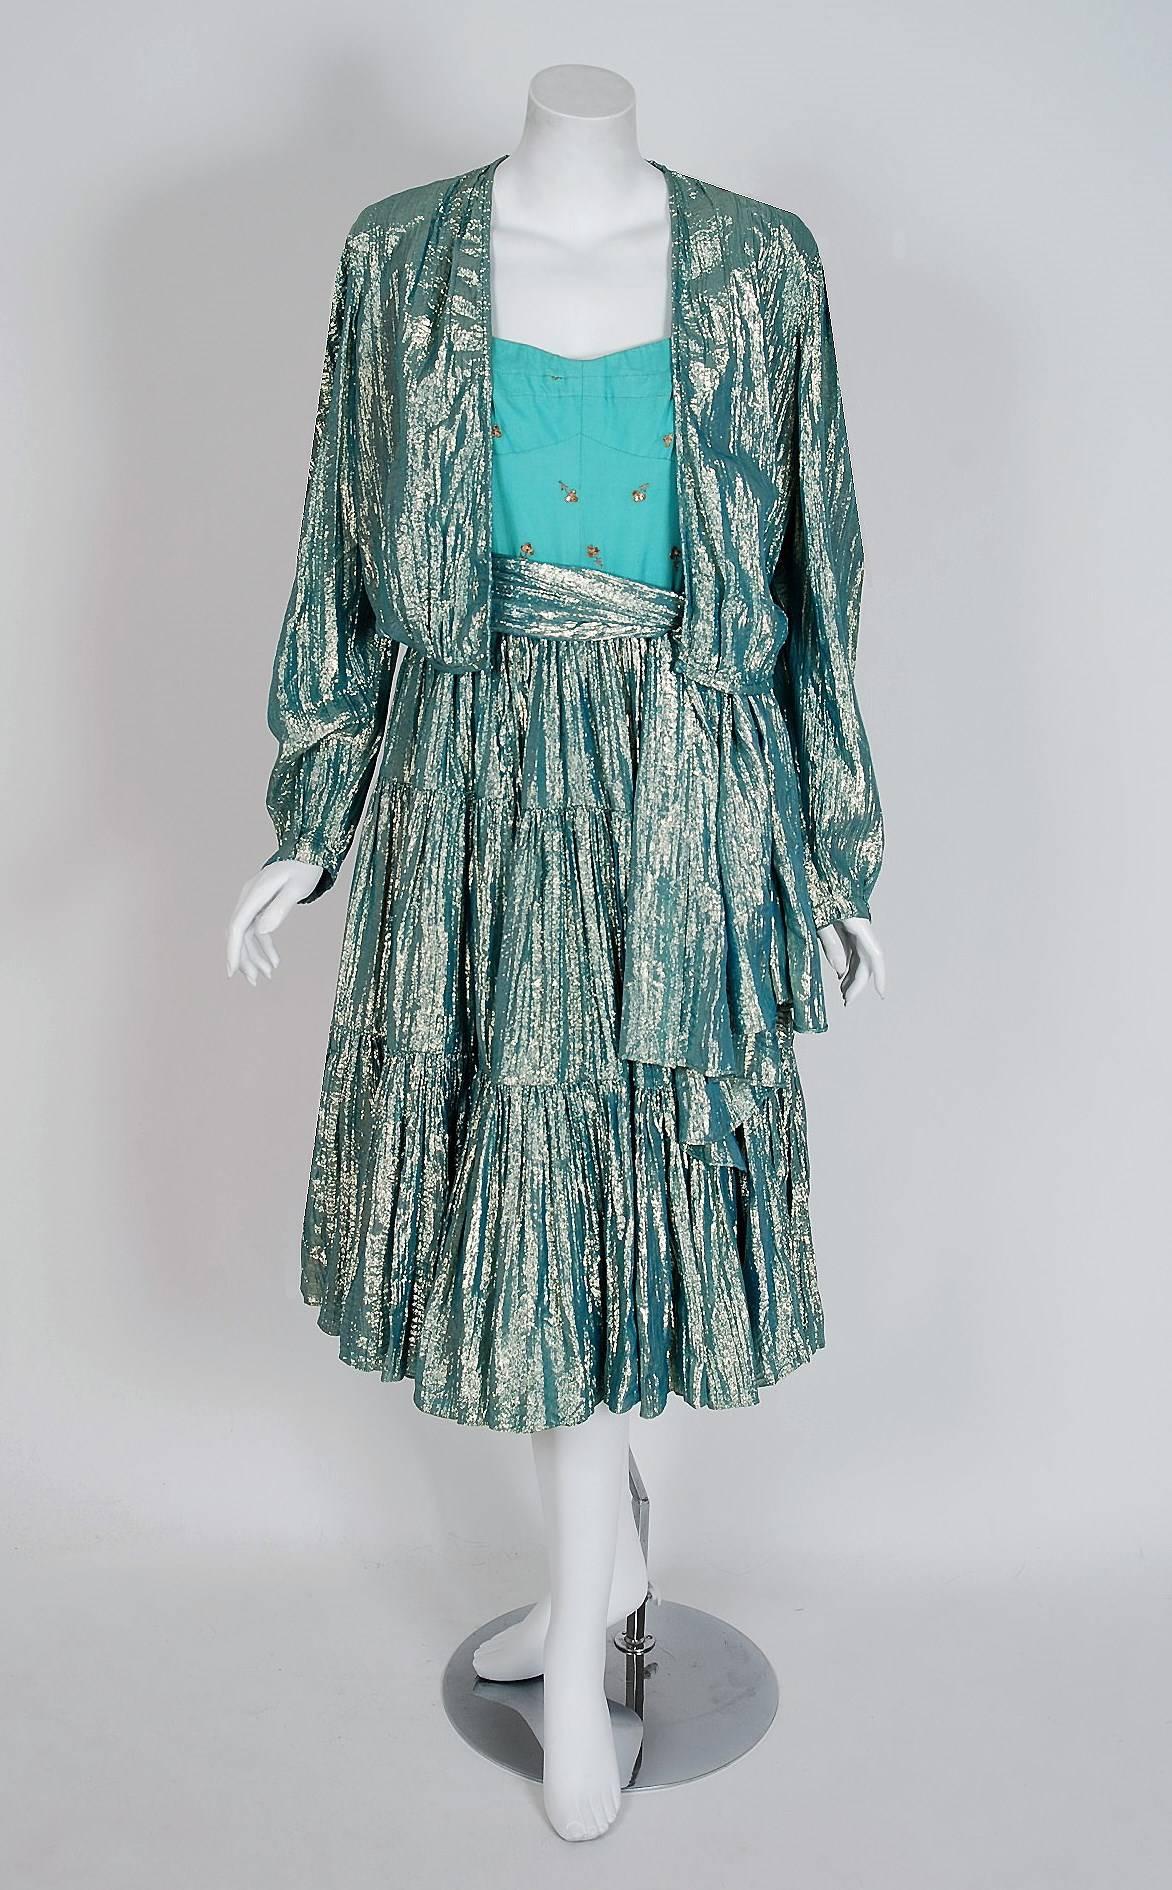 Women's 1977 Thea Porter Couture Metallic Embroidered Silk Lamé Gypsy Dress & Jacket